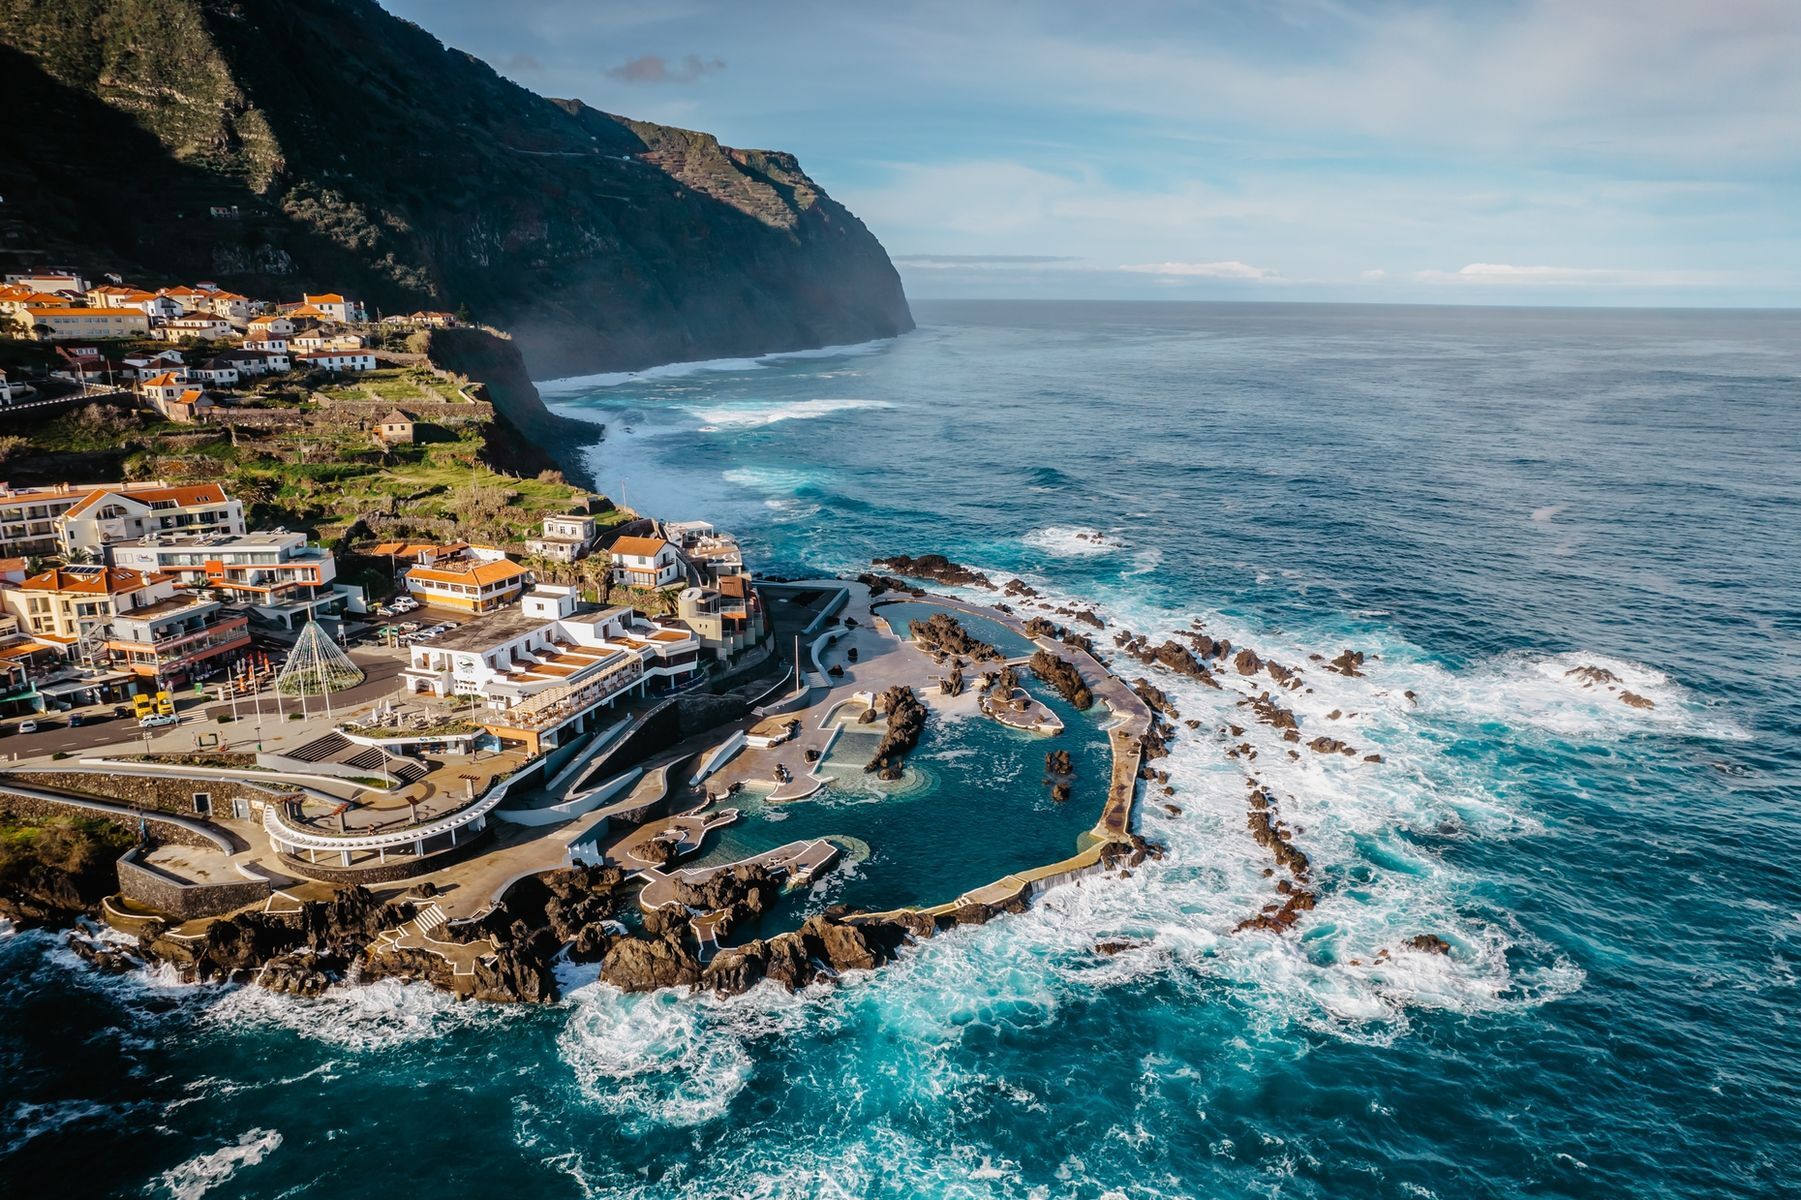 <p>Often referred to as “Europe’s Hawaii,” the Portuguese island of <a href="https://visitmadeira.com/en/" class="CMY_Link CMY_Valid" rel="noreferrer noopener">Madeira</a> seduces visitors with its breathtakingly diverse landscapes and various activities. Activities include exploring the <a href="https://whc.unesco.org/en/tentativelists/6230/" class="CMY_Link CMY_Valid" rel="noreferrer noopener">levadas</a> that wind through lush forests and venturing to the summit of <a href="https://visitmadeira.com/en/where-to-go/madeira/madeira-peaks/pico-do-areeiro/" class="CMY_Link CMY_Valid" rel="noreferrer noopener">Pico do Areeiro</a> for exceptional views of the island. Madeira is also famous for its fortified wine and traditional celebrations, such as the Flower Festival. With mild weather year-round, this island is a magical destination offering dreamlike experiences from day one.</p>